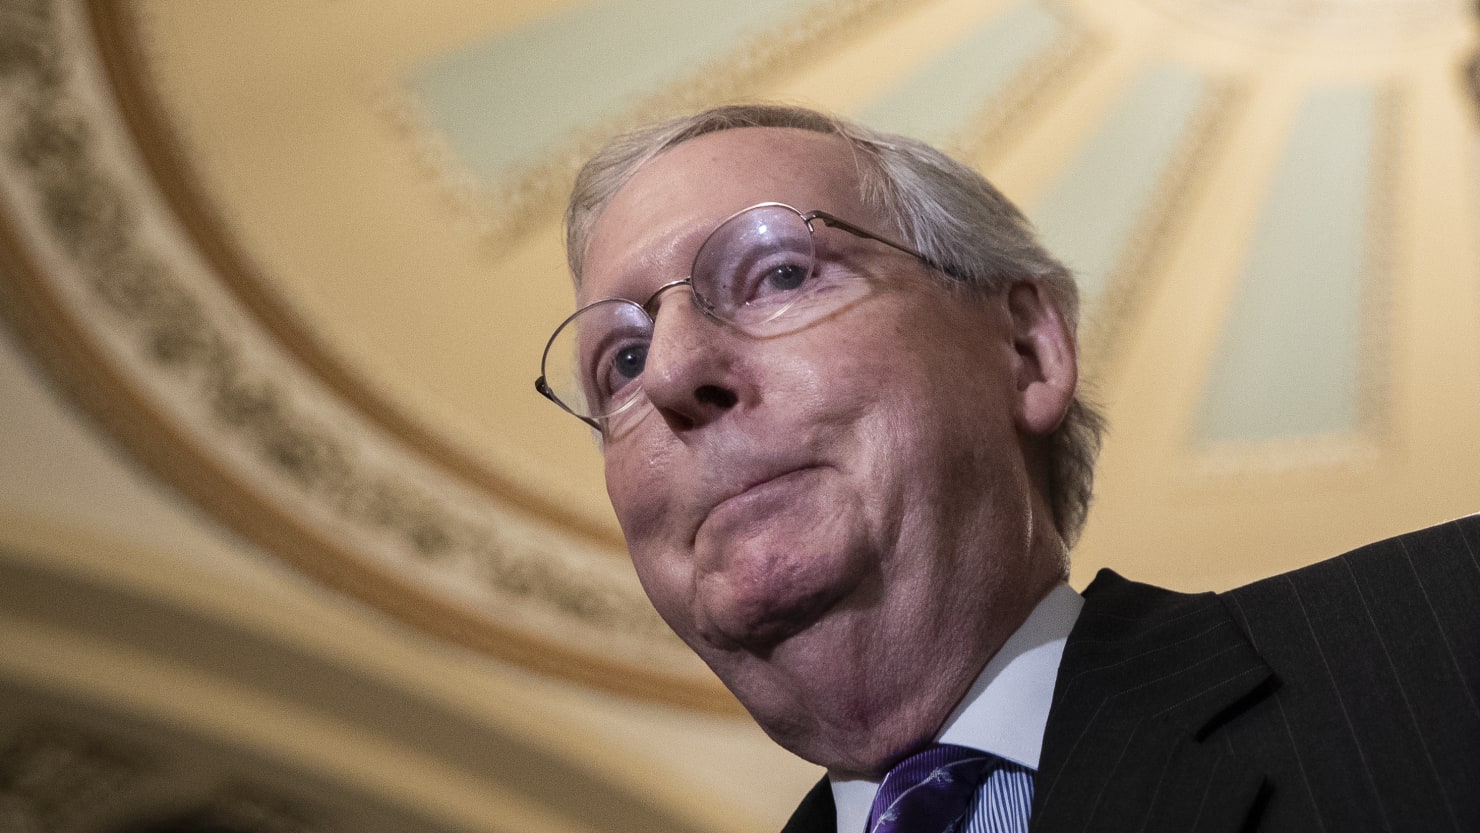 Mitch McConnell Ready to Steamroll Dems on Ruth Bader Ginsburg Replacement